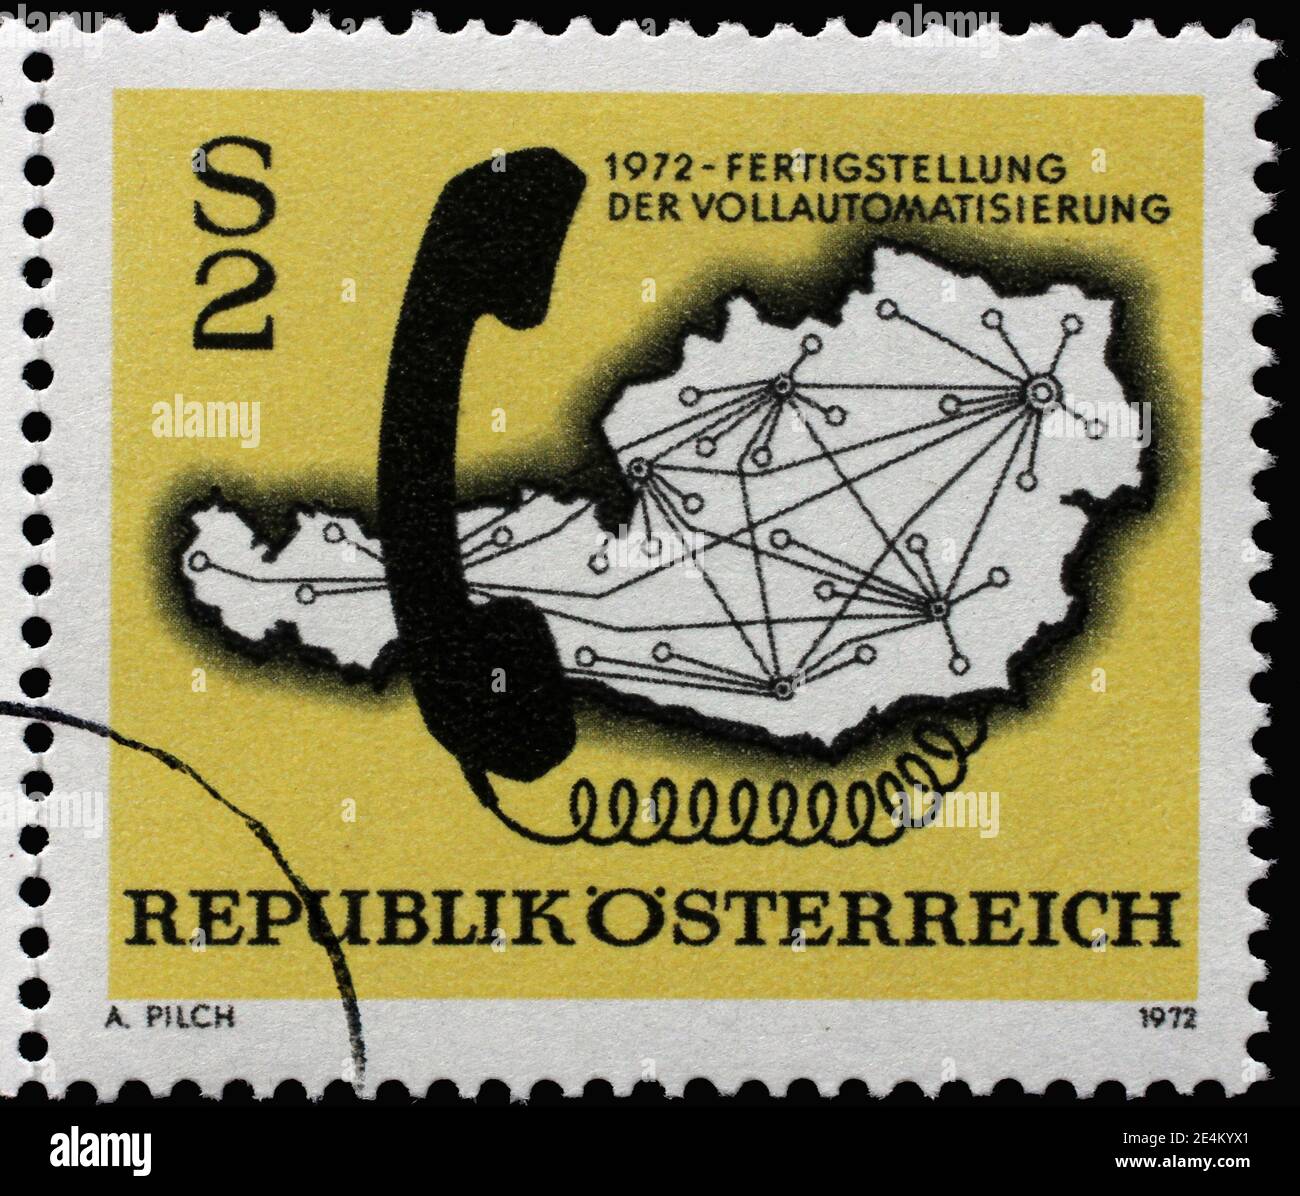 Stamp issued in Austria on the occasion of Finishing of the Automated Telephone Network, circa 1972. Stock Photo